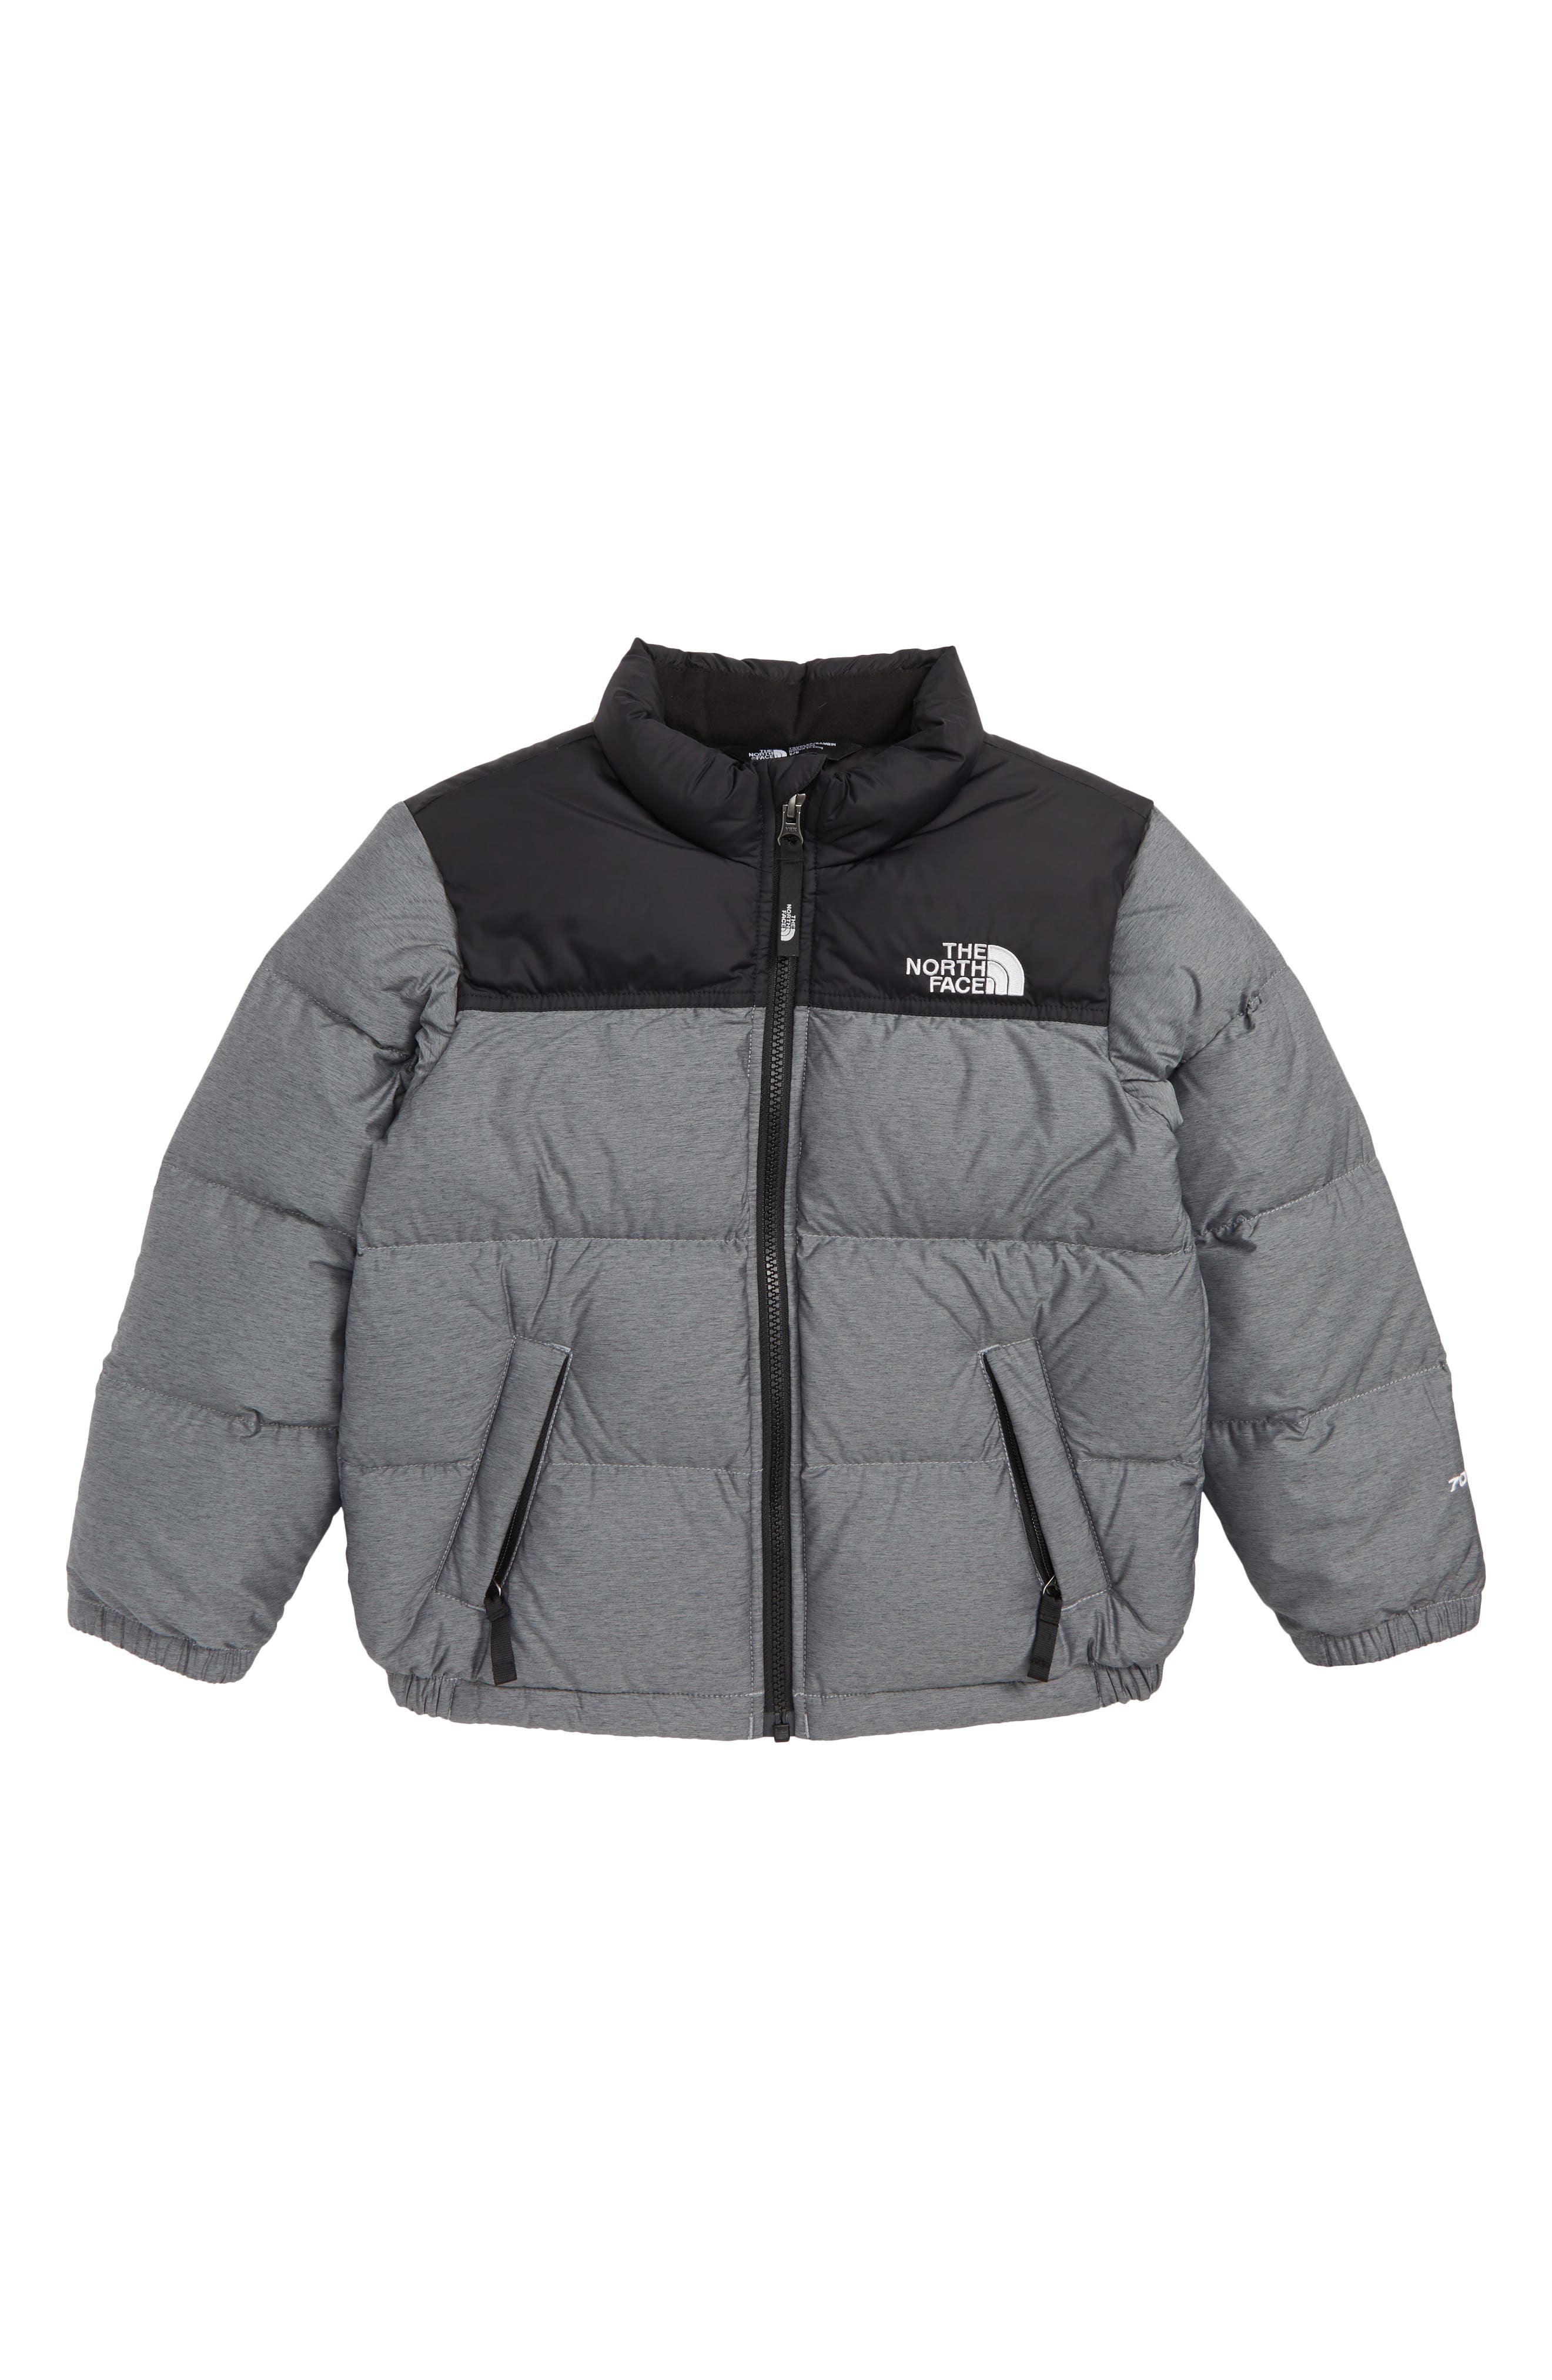 the north face 700 grey